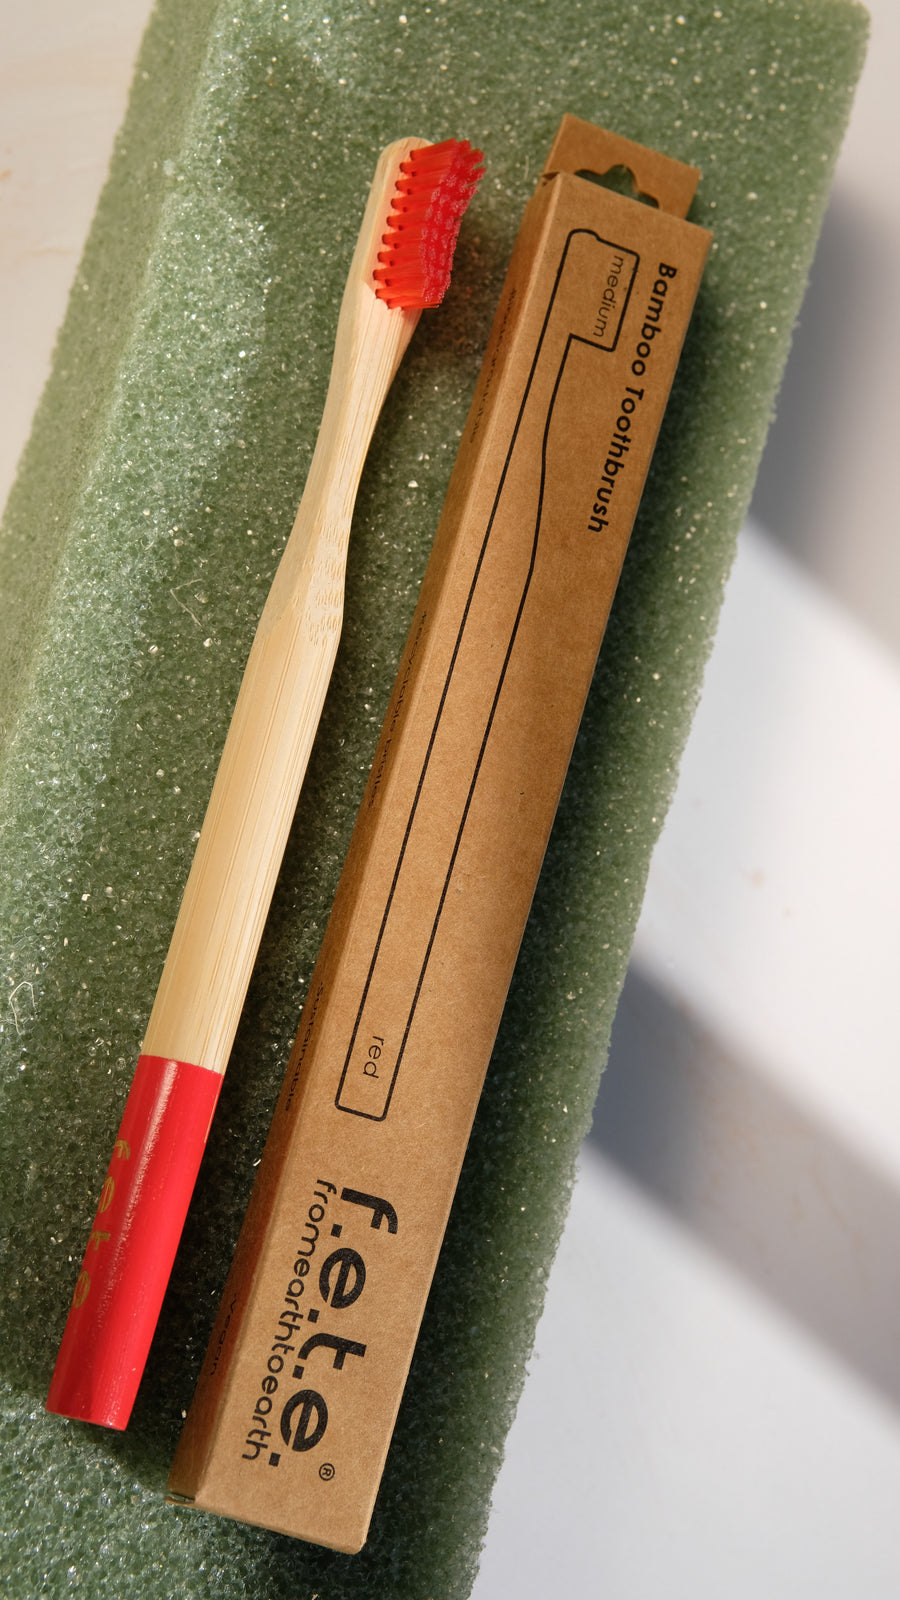 F.E.T.E. Medium Bamboo Toothbrush in Red